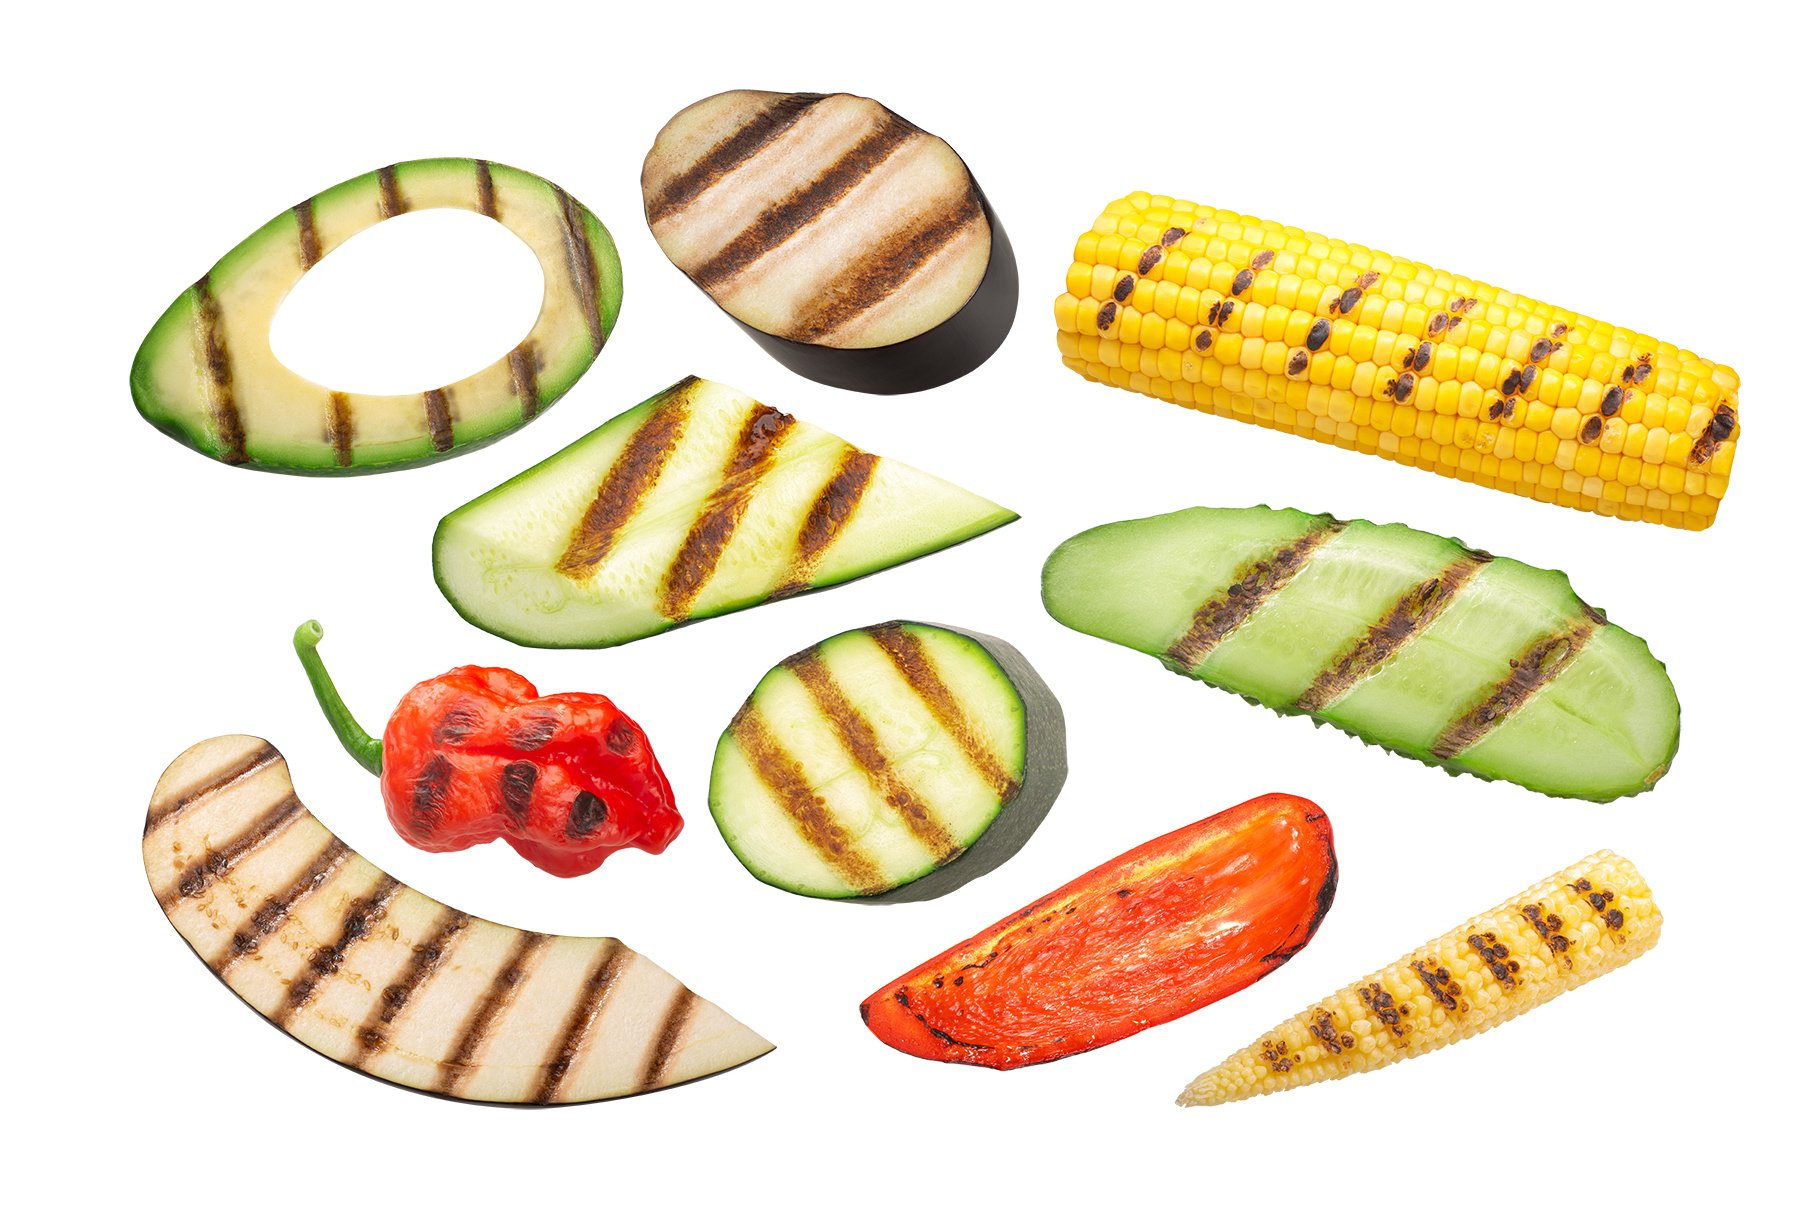 Grilled veggies cover image.